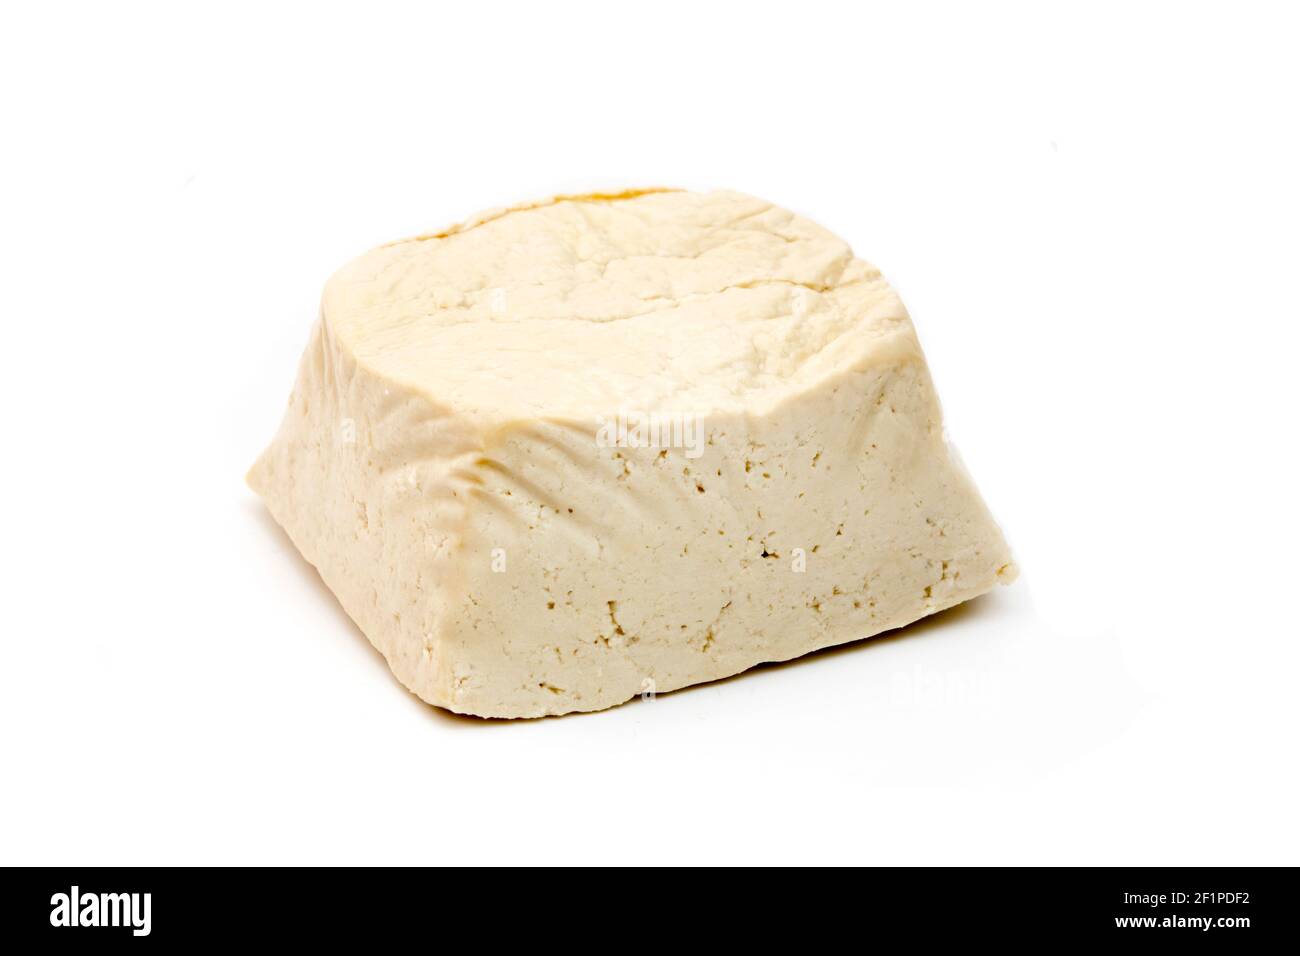 Firm tofu on a white background Stock Photo